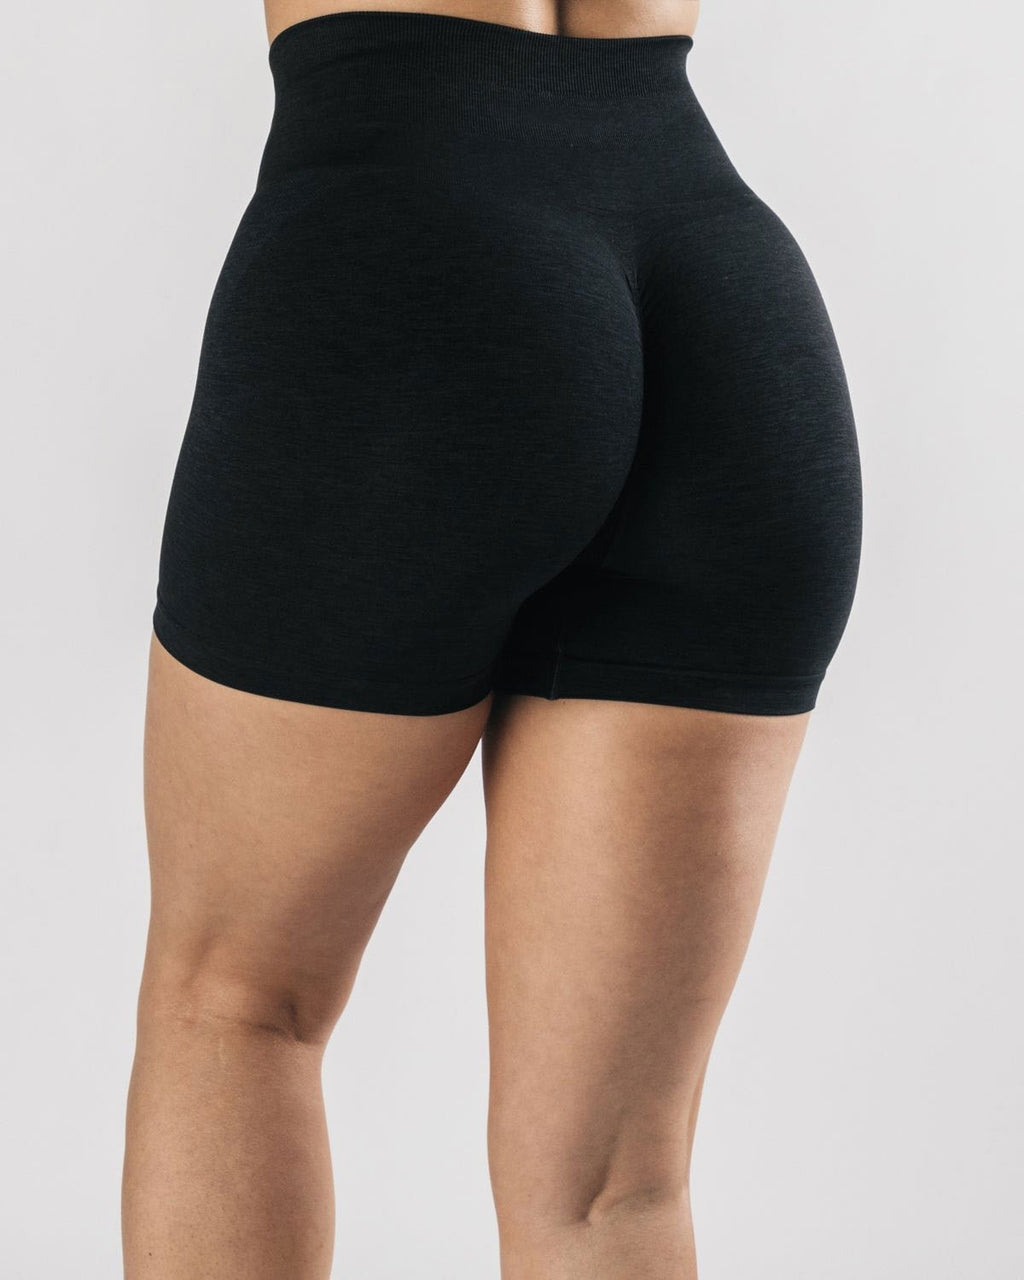 Magnitude Seamless Shorts - Black - | LIMITLESS FIT WEAR